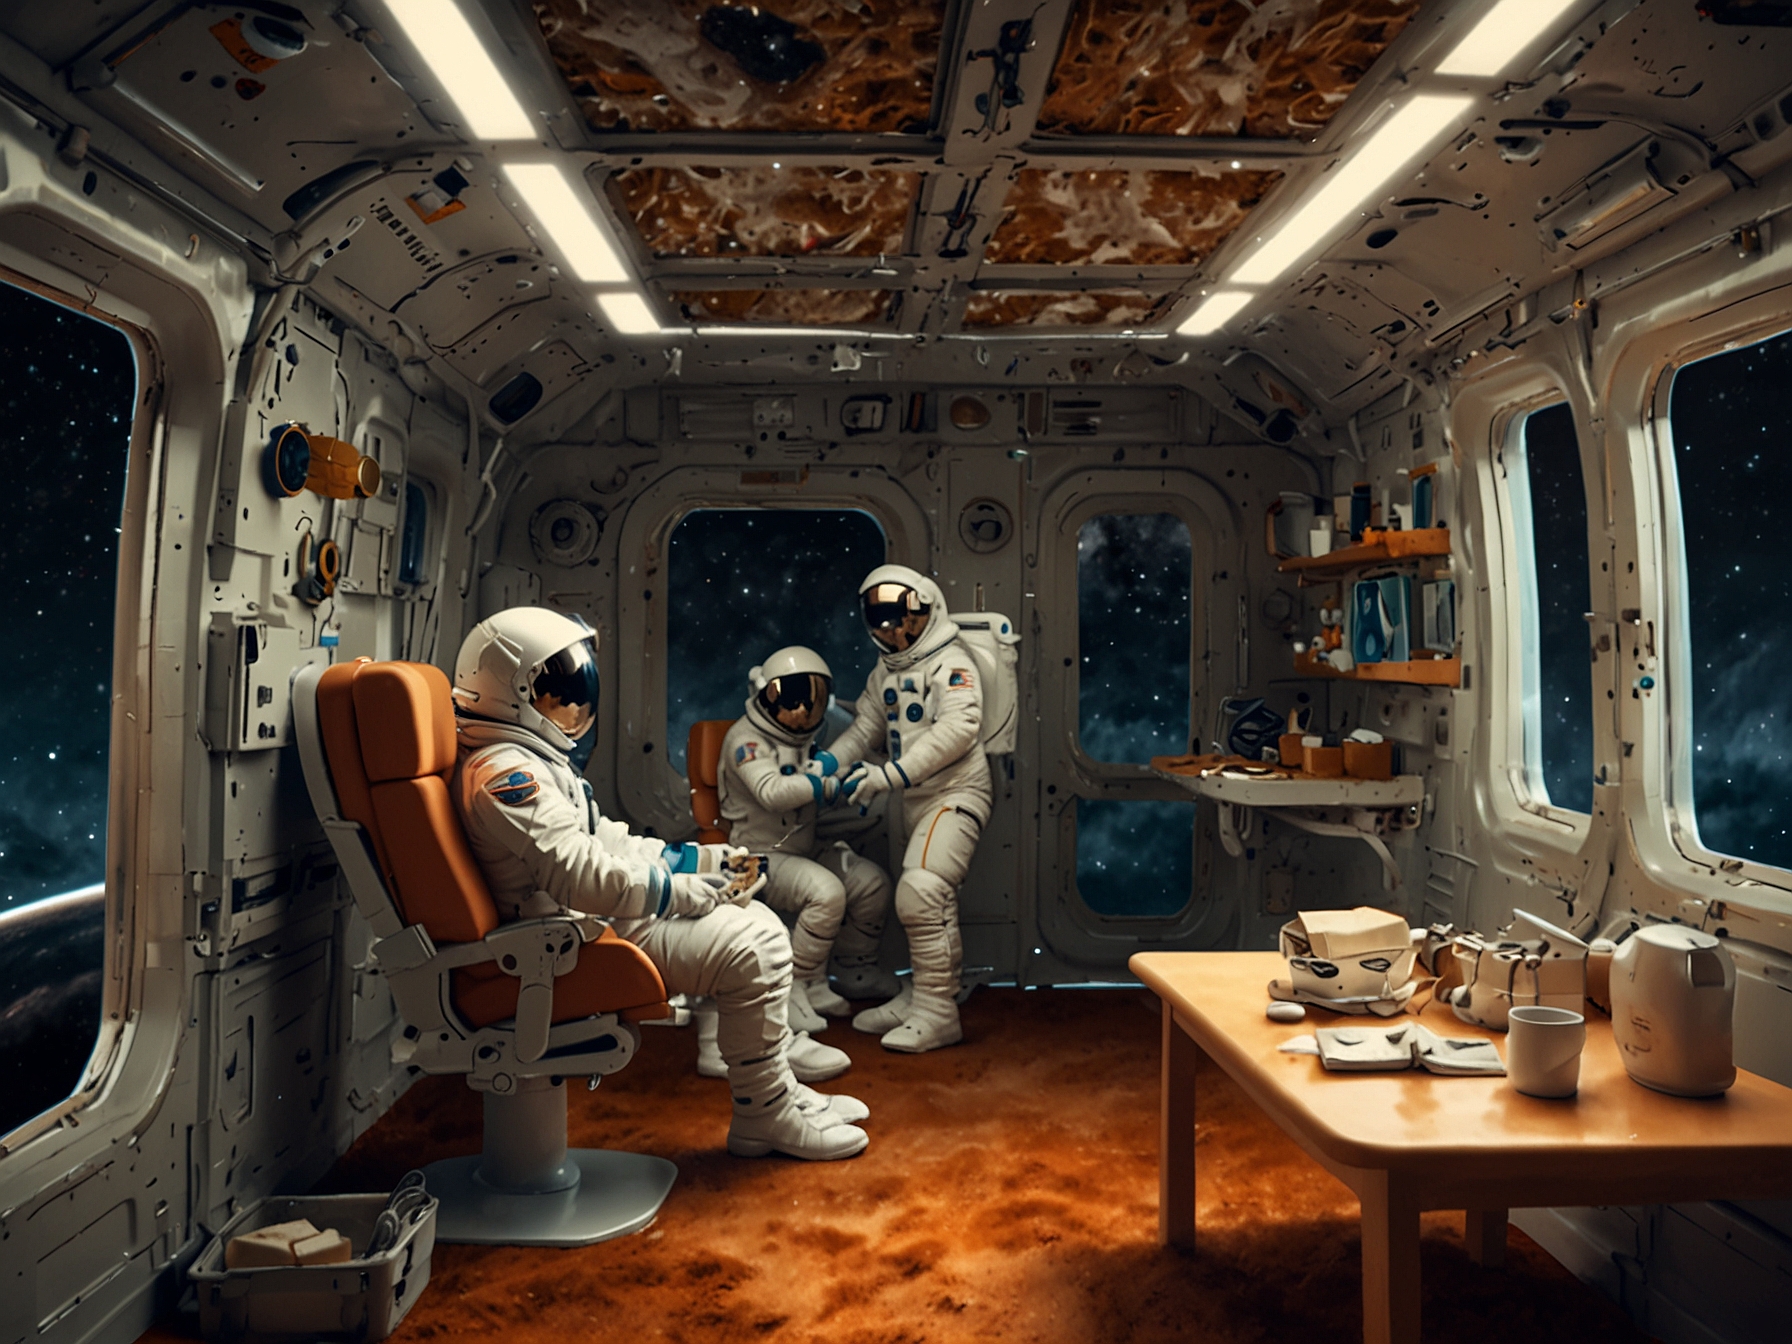 Depiction of astronauts growing furniture from mushroom mycelium in a space station, highlighting the adaptability and sustainability of mycelium-based materials for daily use in outer space.